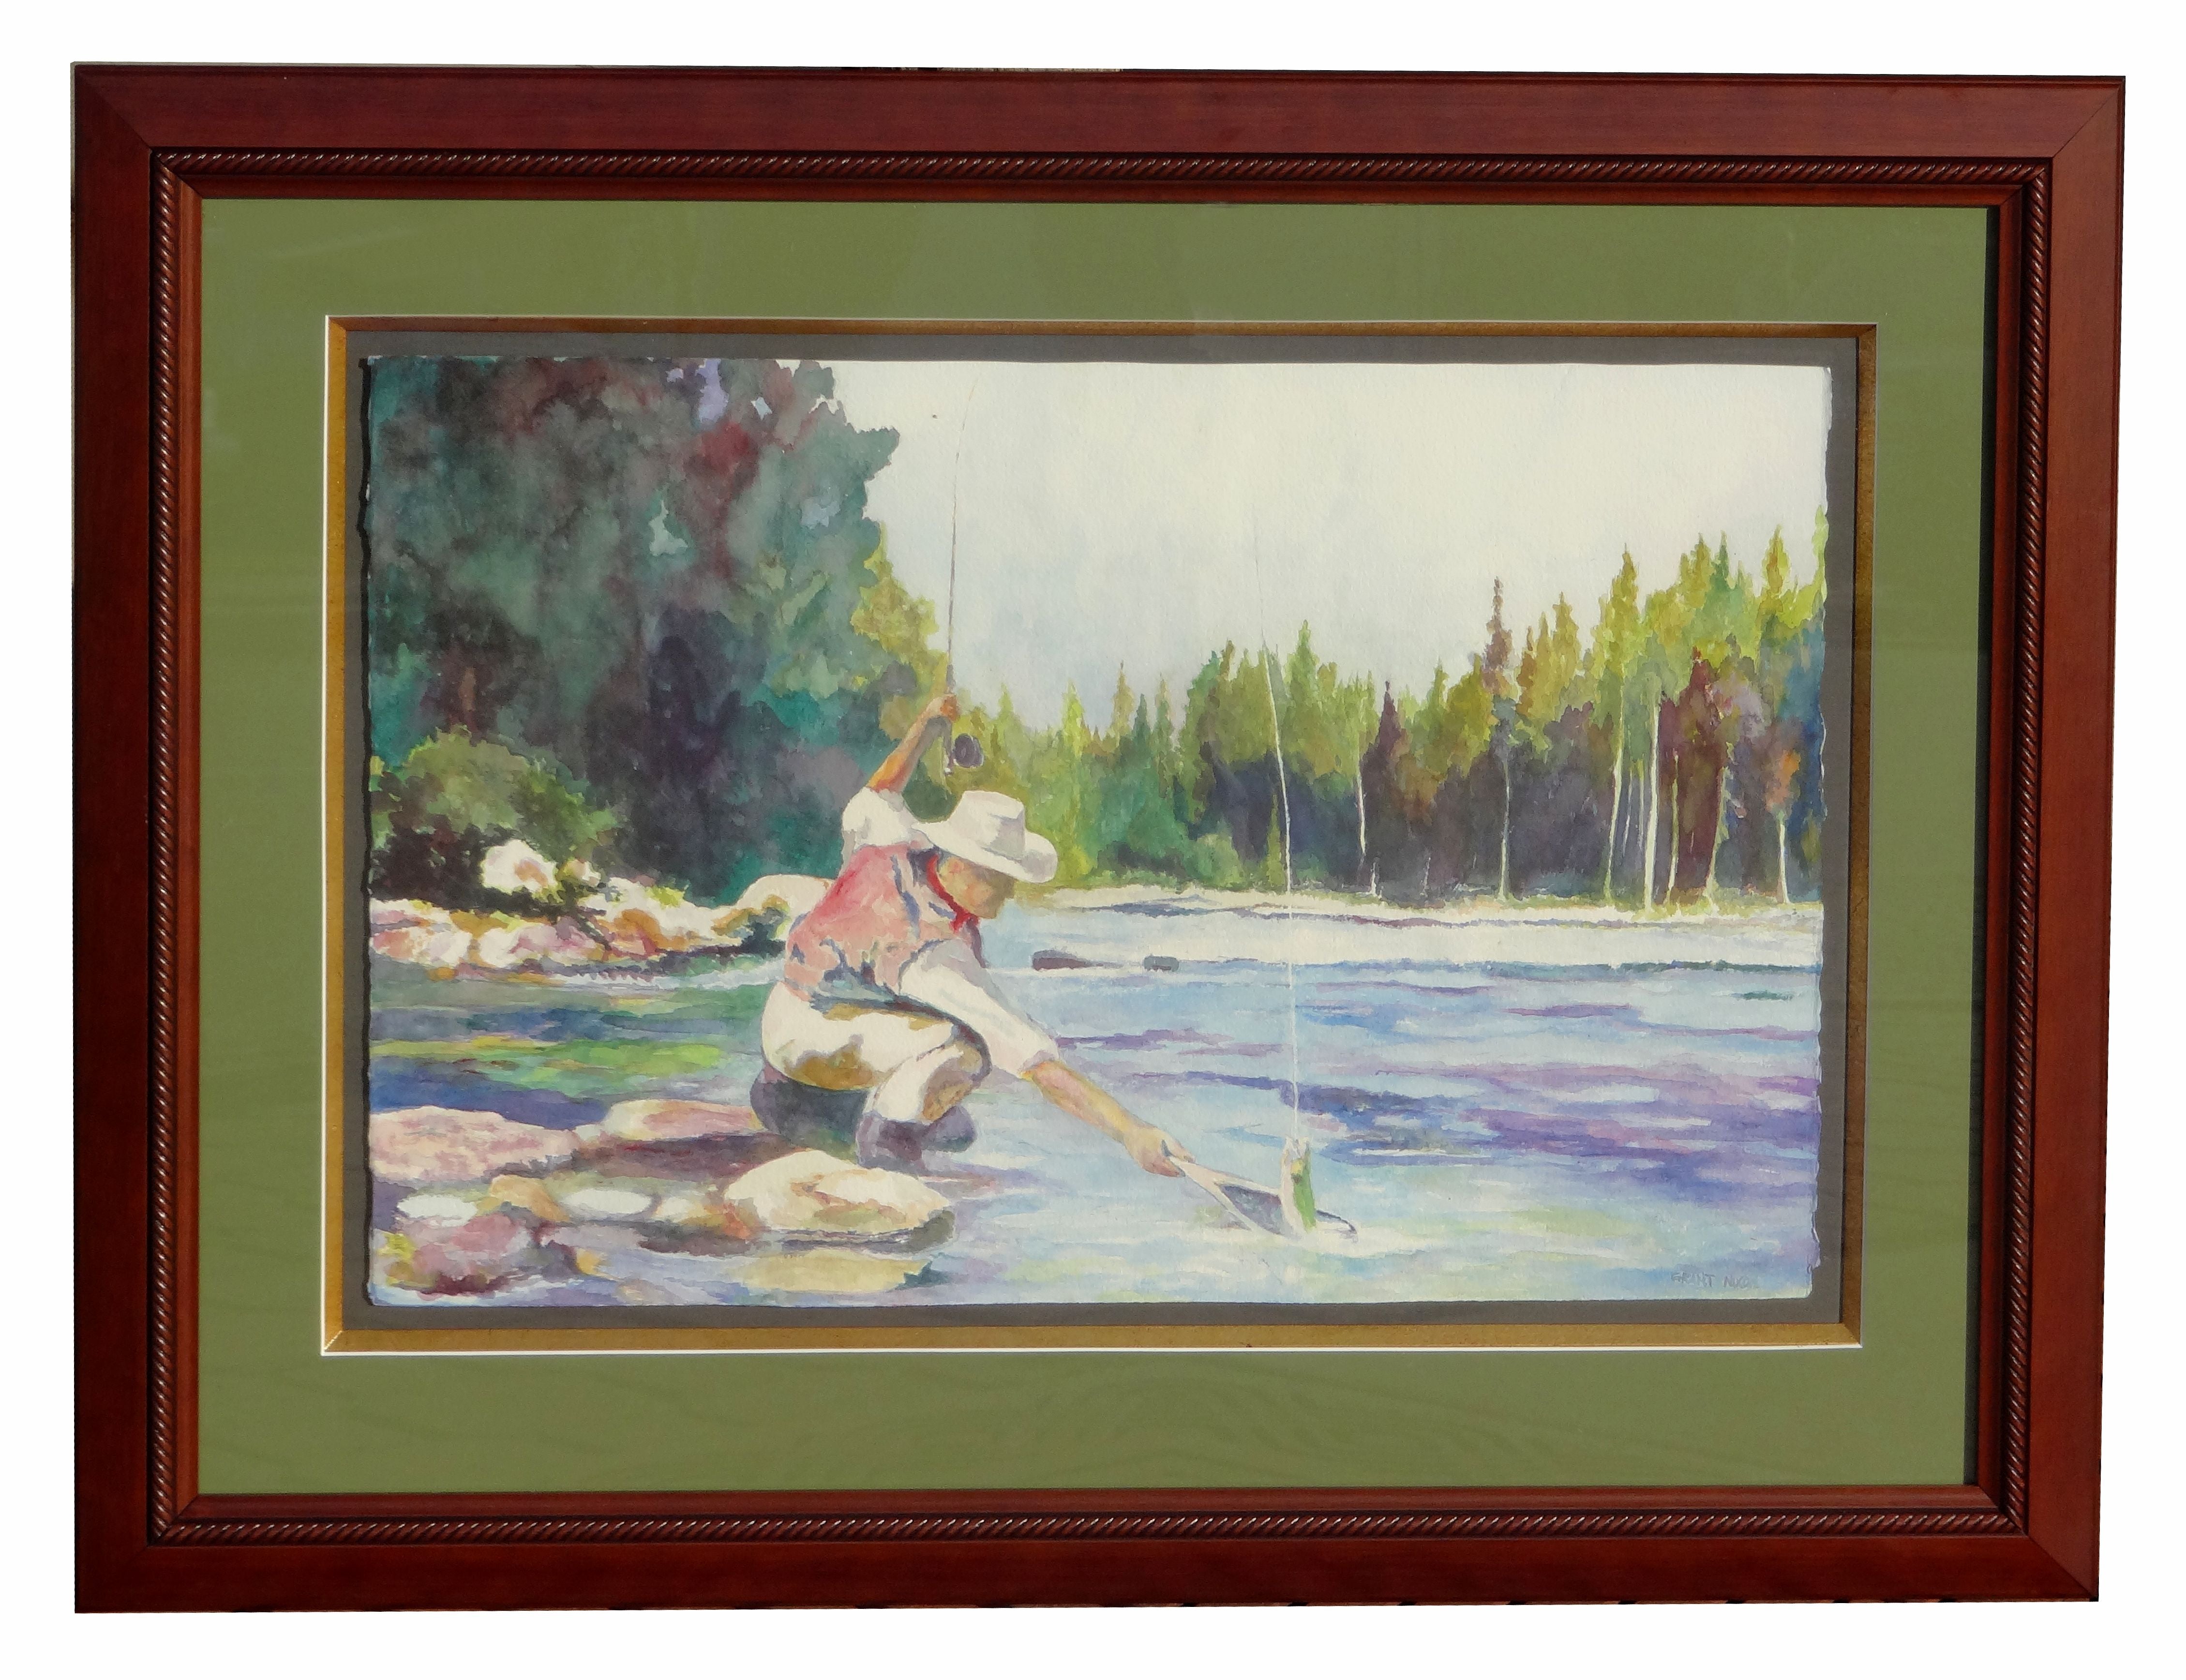 Fishing on the Moyie by Grant Nixon